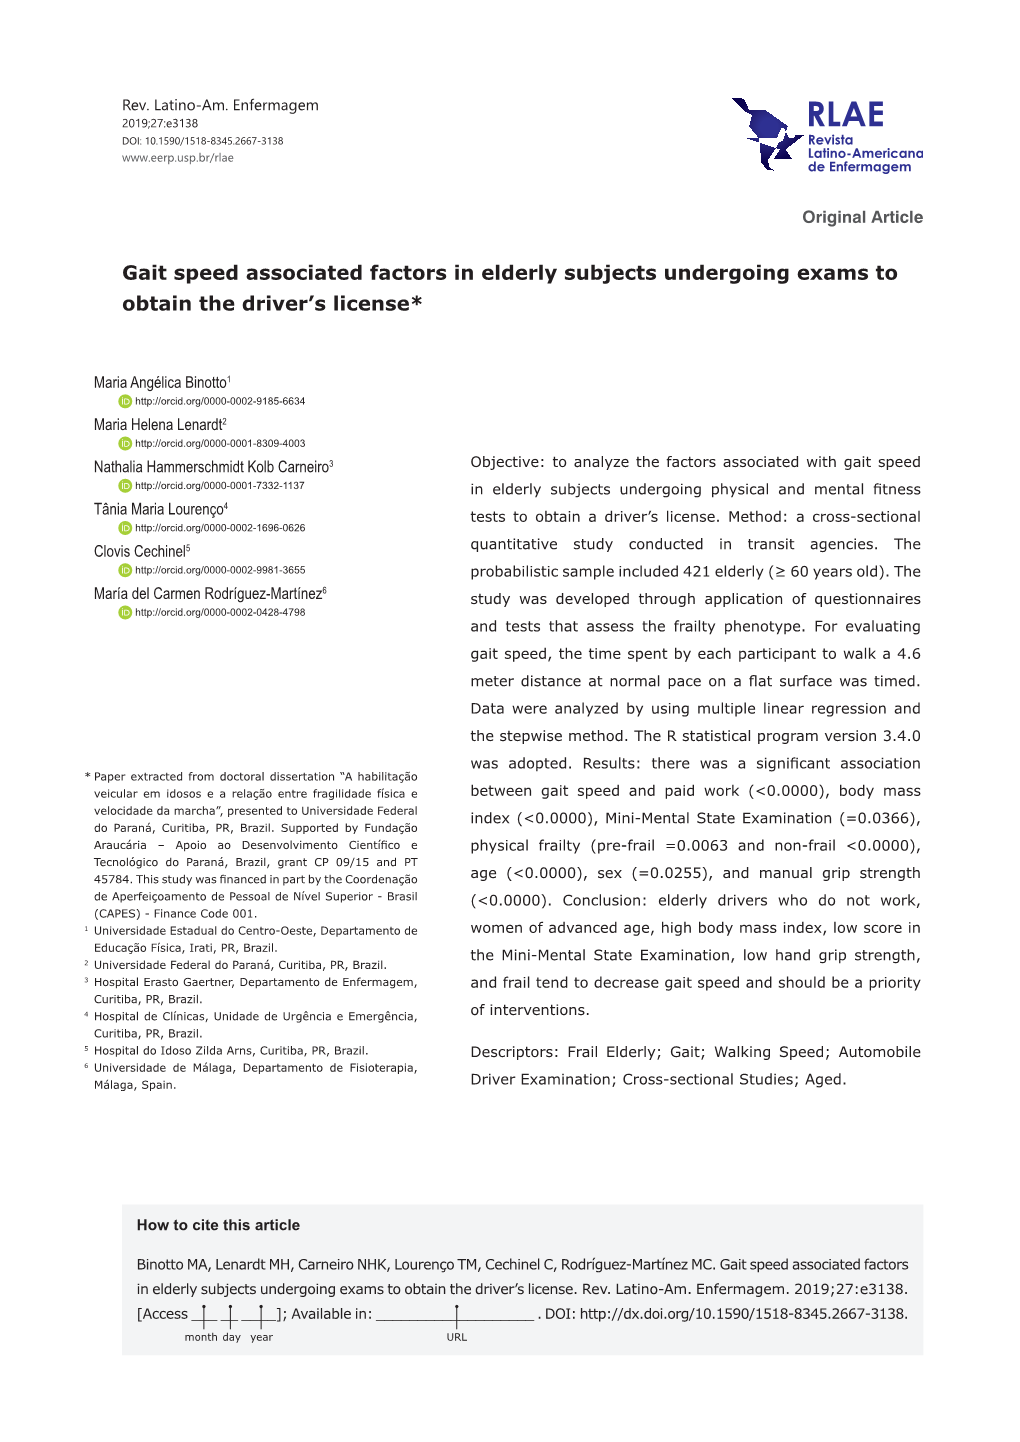 Gait Speed Associated Factors in Elderly Subjects Undergoing Exams to Obtain the Driver’S License*